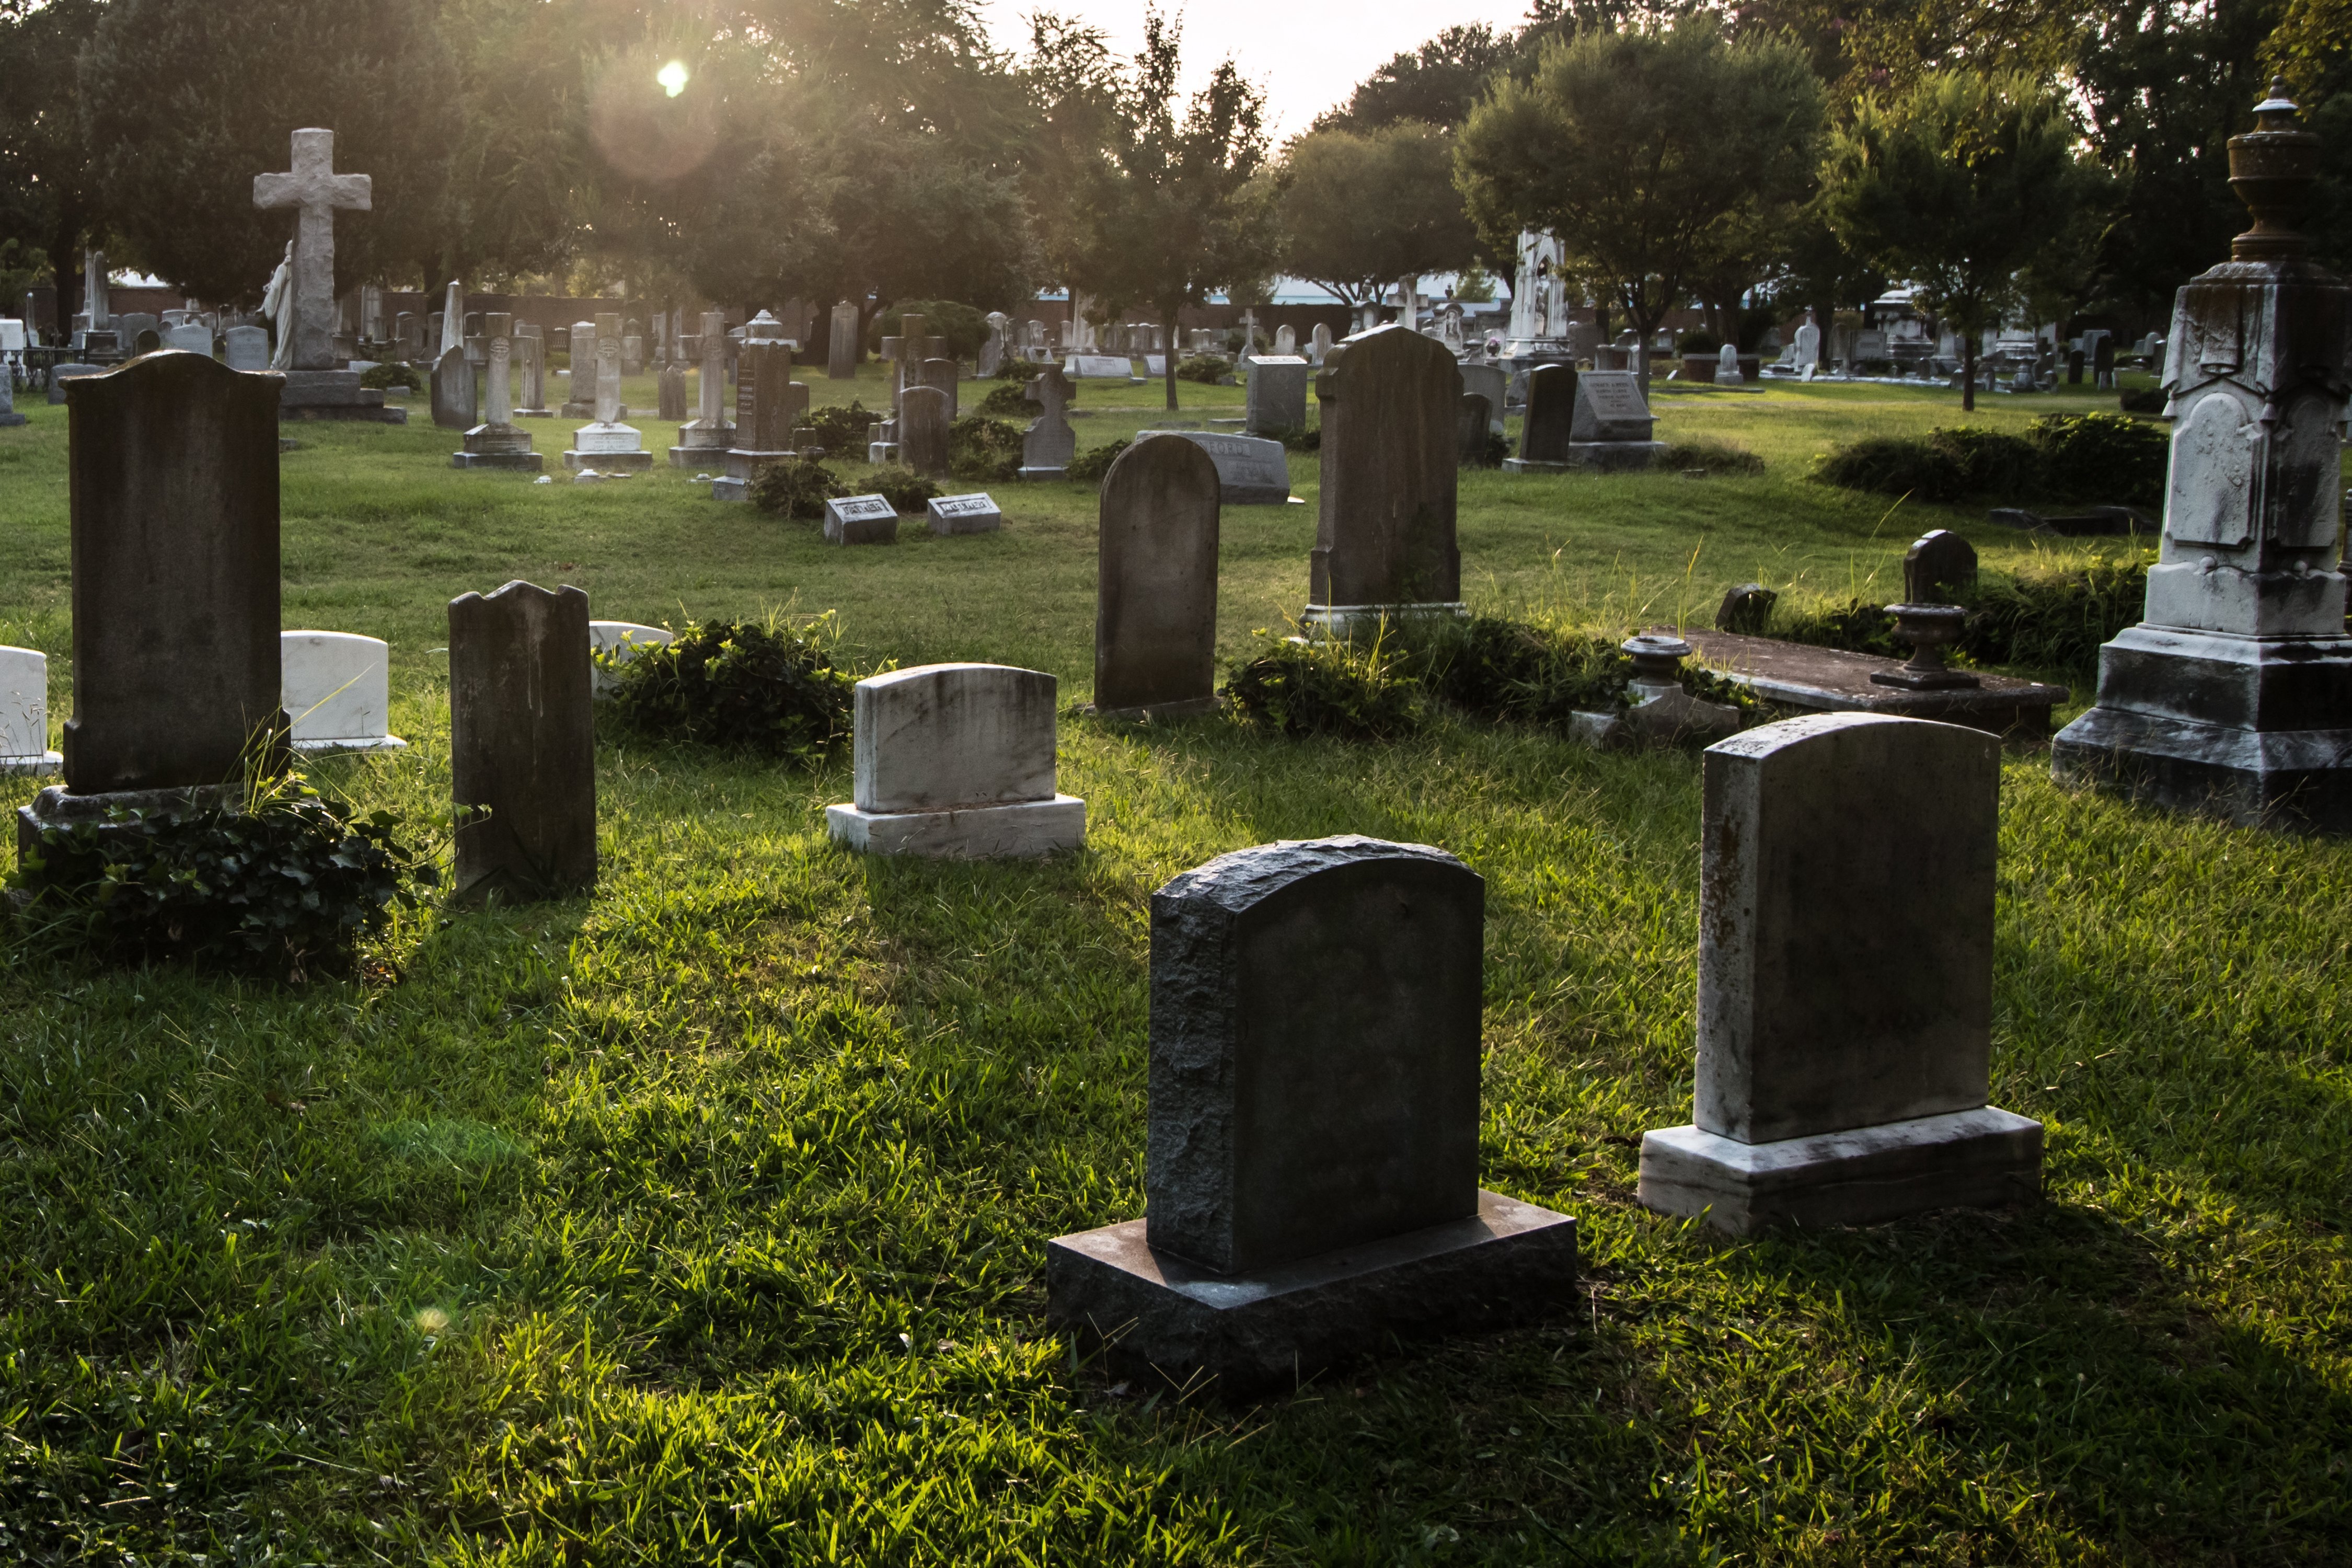 Tombstones in cemetery at dusk. | Photo: Shutterstock